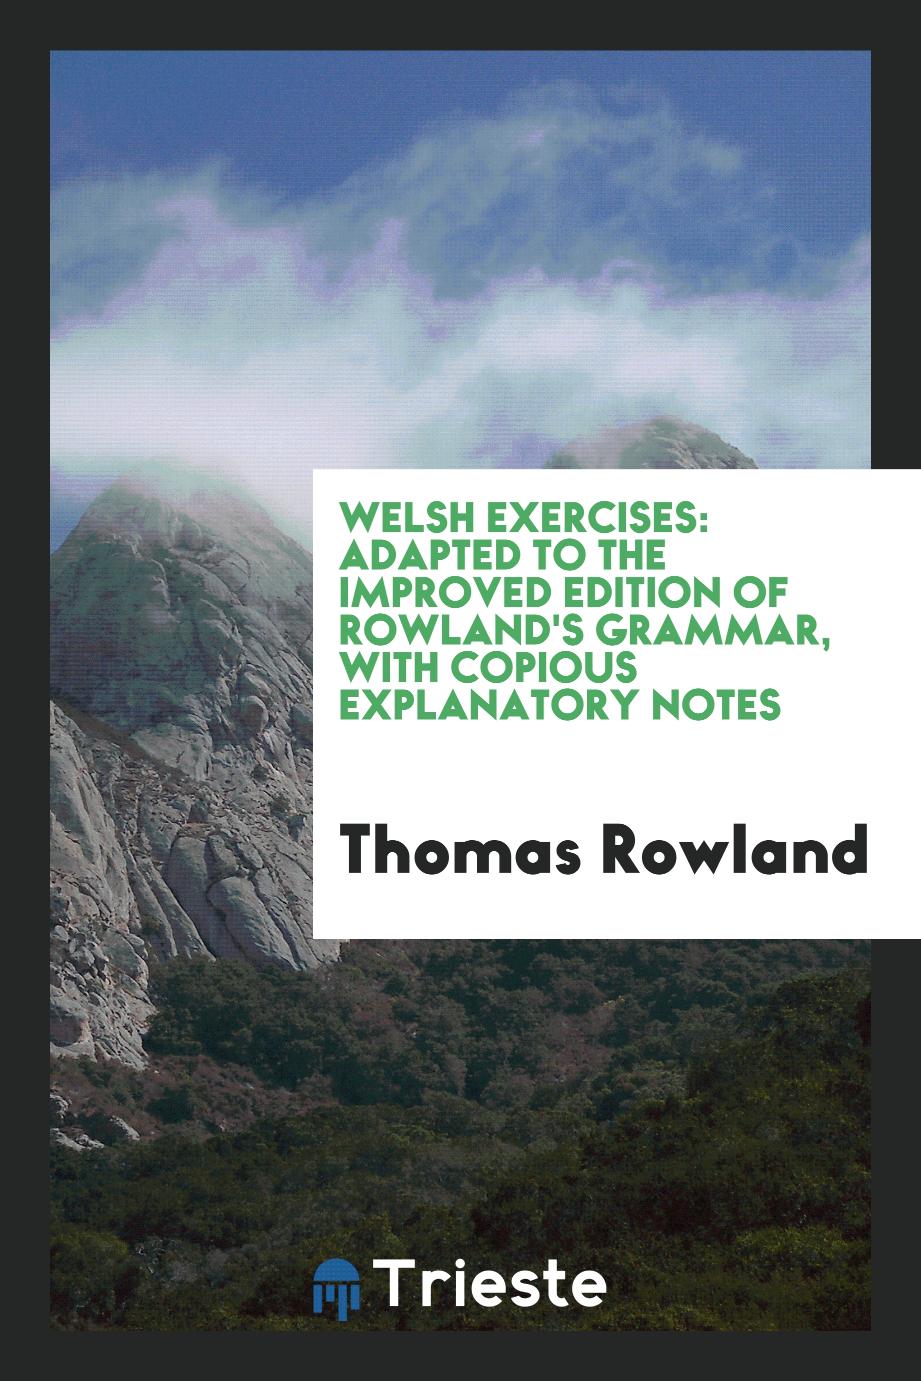 Welsh exercises: adapted to the improved edition of Rowland's grammar, with copious explanatory notes